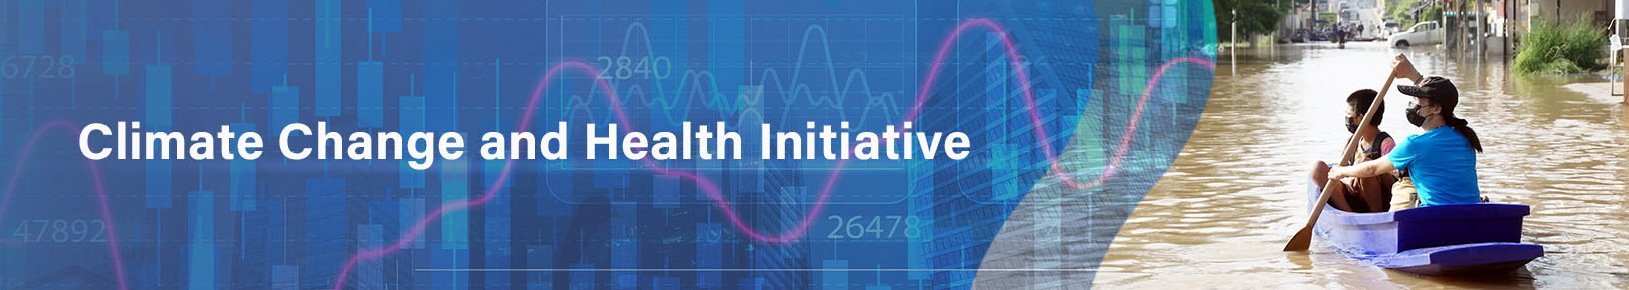 NIH Climate Change and Health Initiative